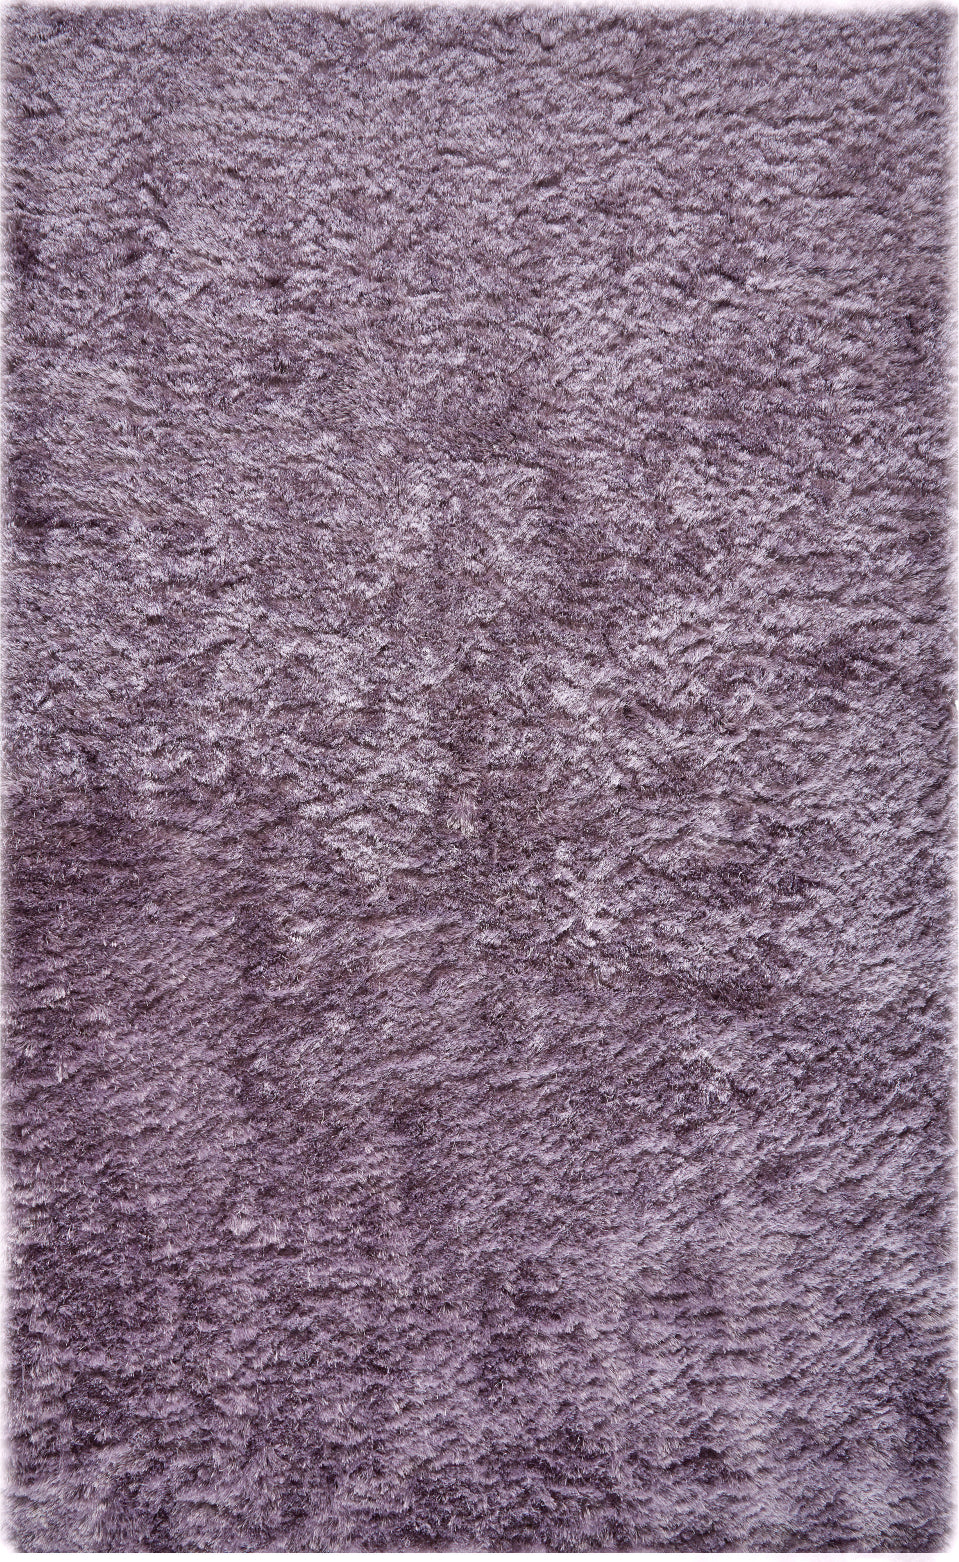 Feizy Indochine 4550F Purple/Gray Area Rug main image